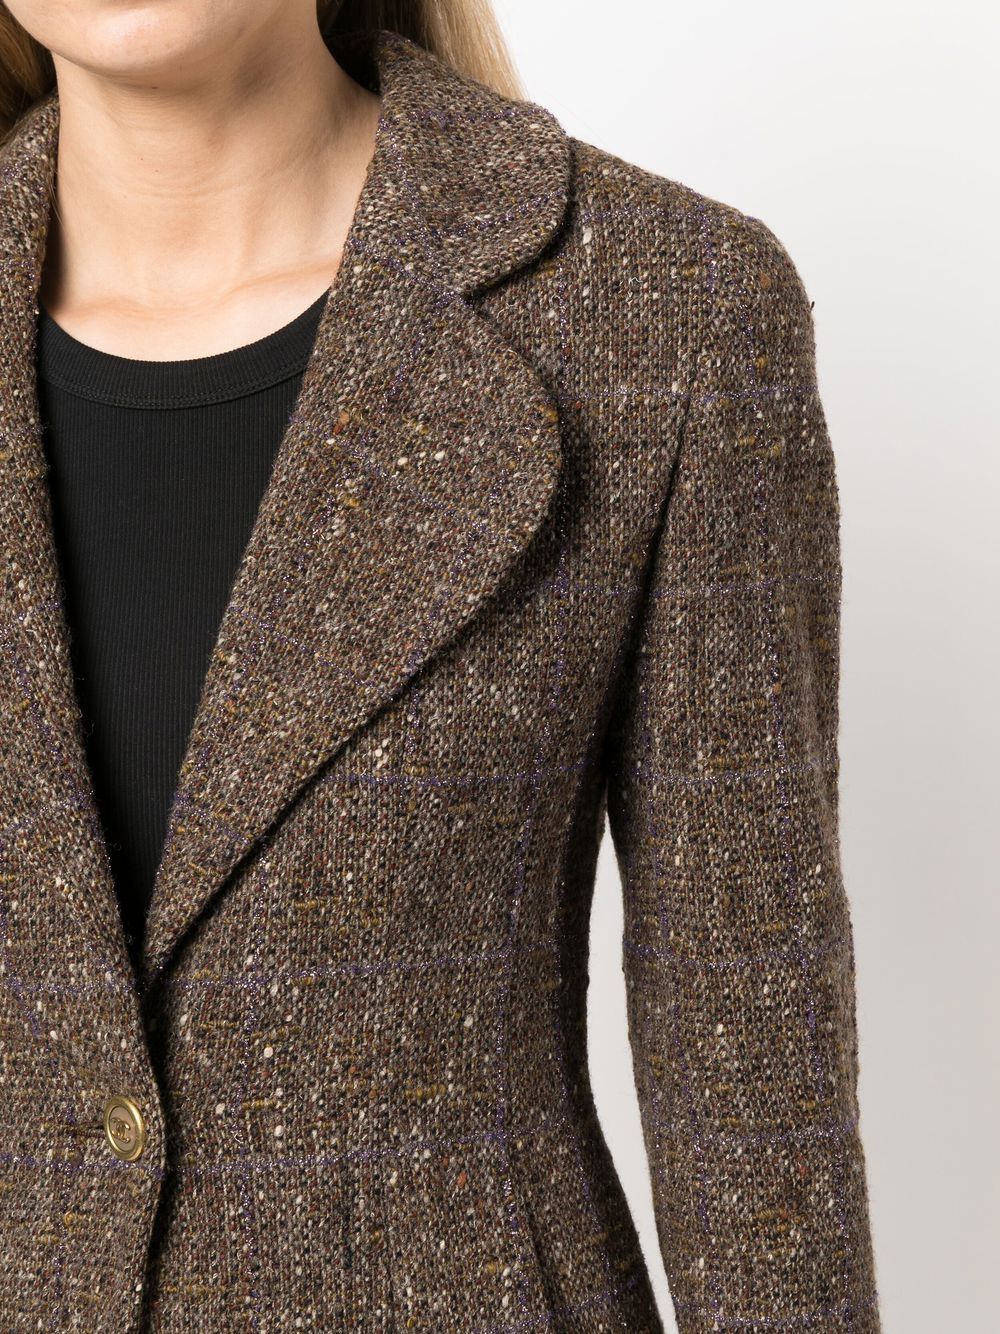 CHANEL Pre-Owned 1994 Notched Lapel Tweed Jacket - Farfetch